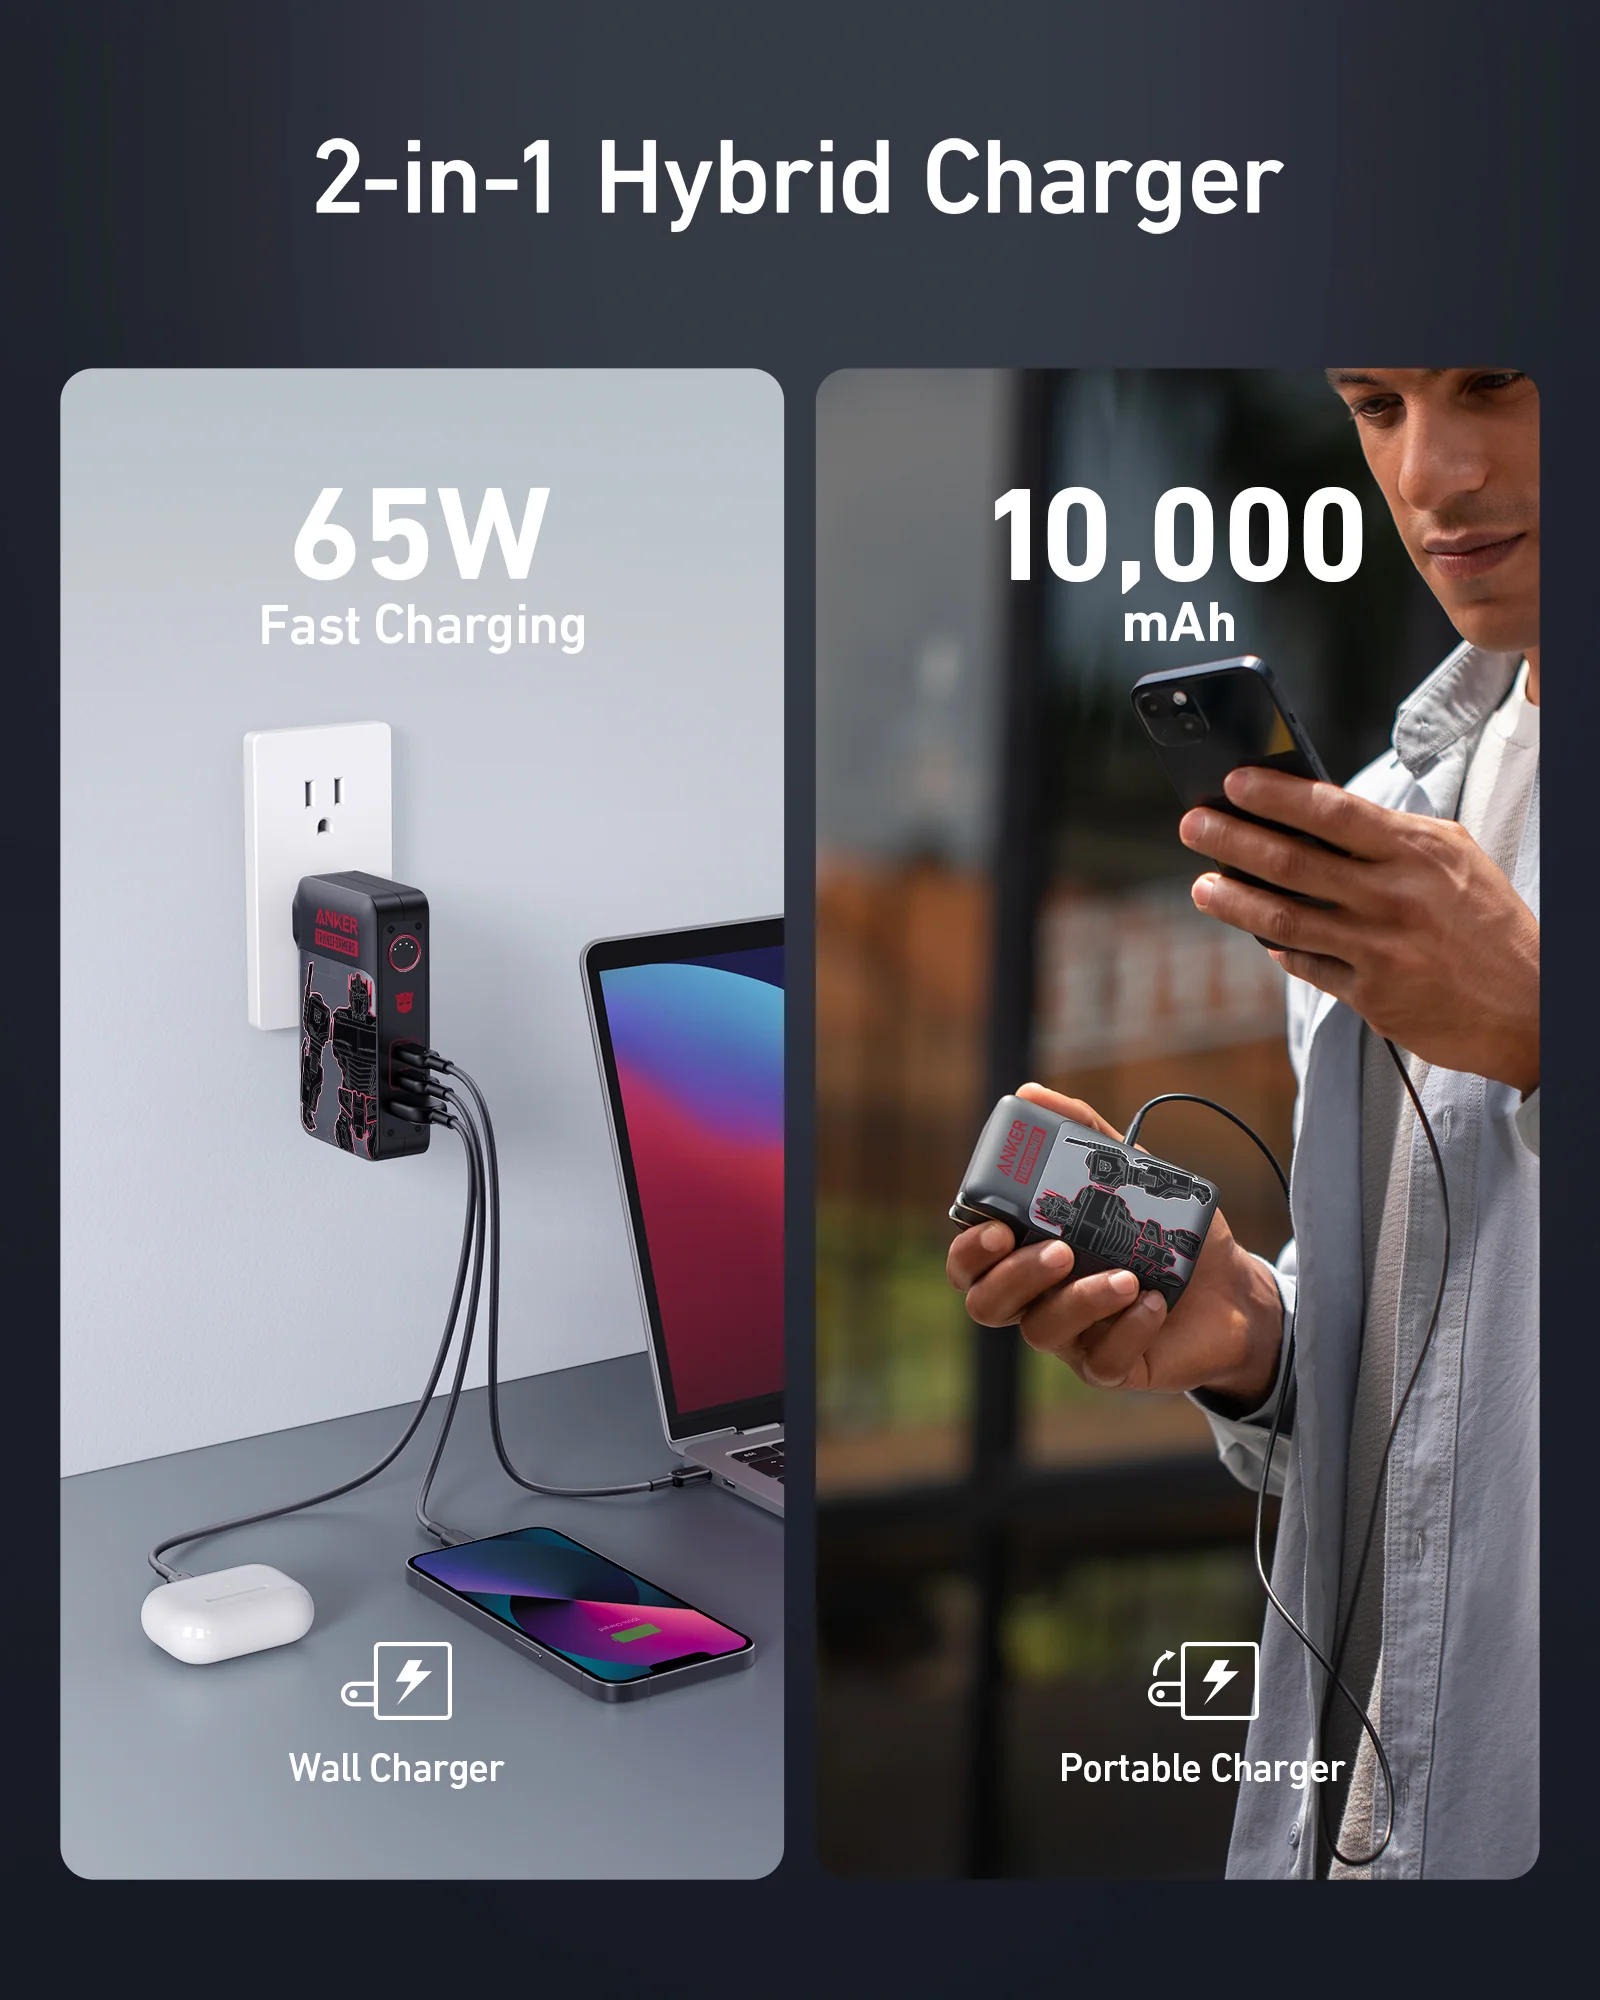 Transformers Inside | Anker Launched 65W GaNPrime 733 Power Bank